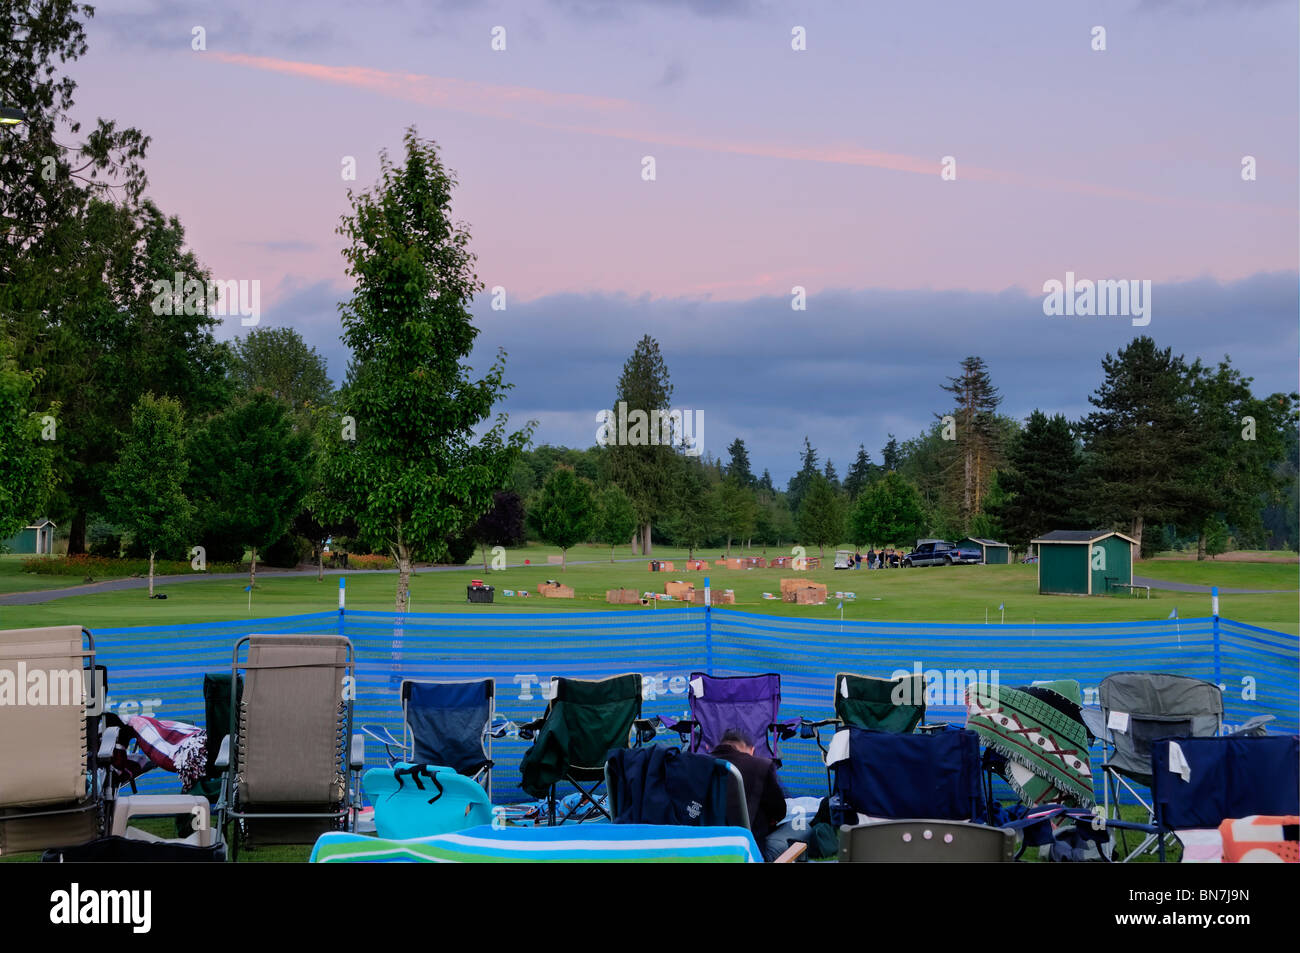 Twilight over the Tumwater Valley golf course in the staging and viewing area for the Thunder Valley Fireworks show extravaganza Stock Photo